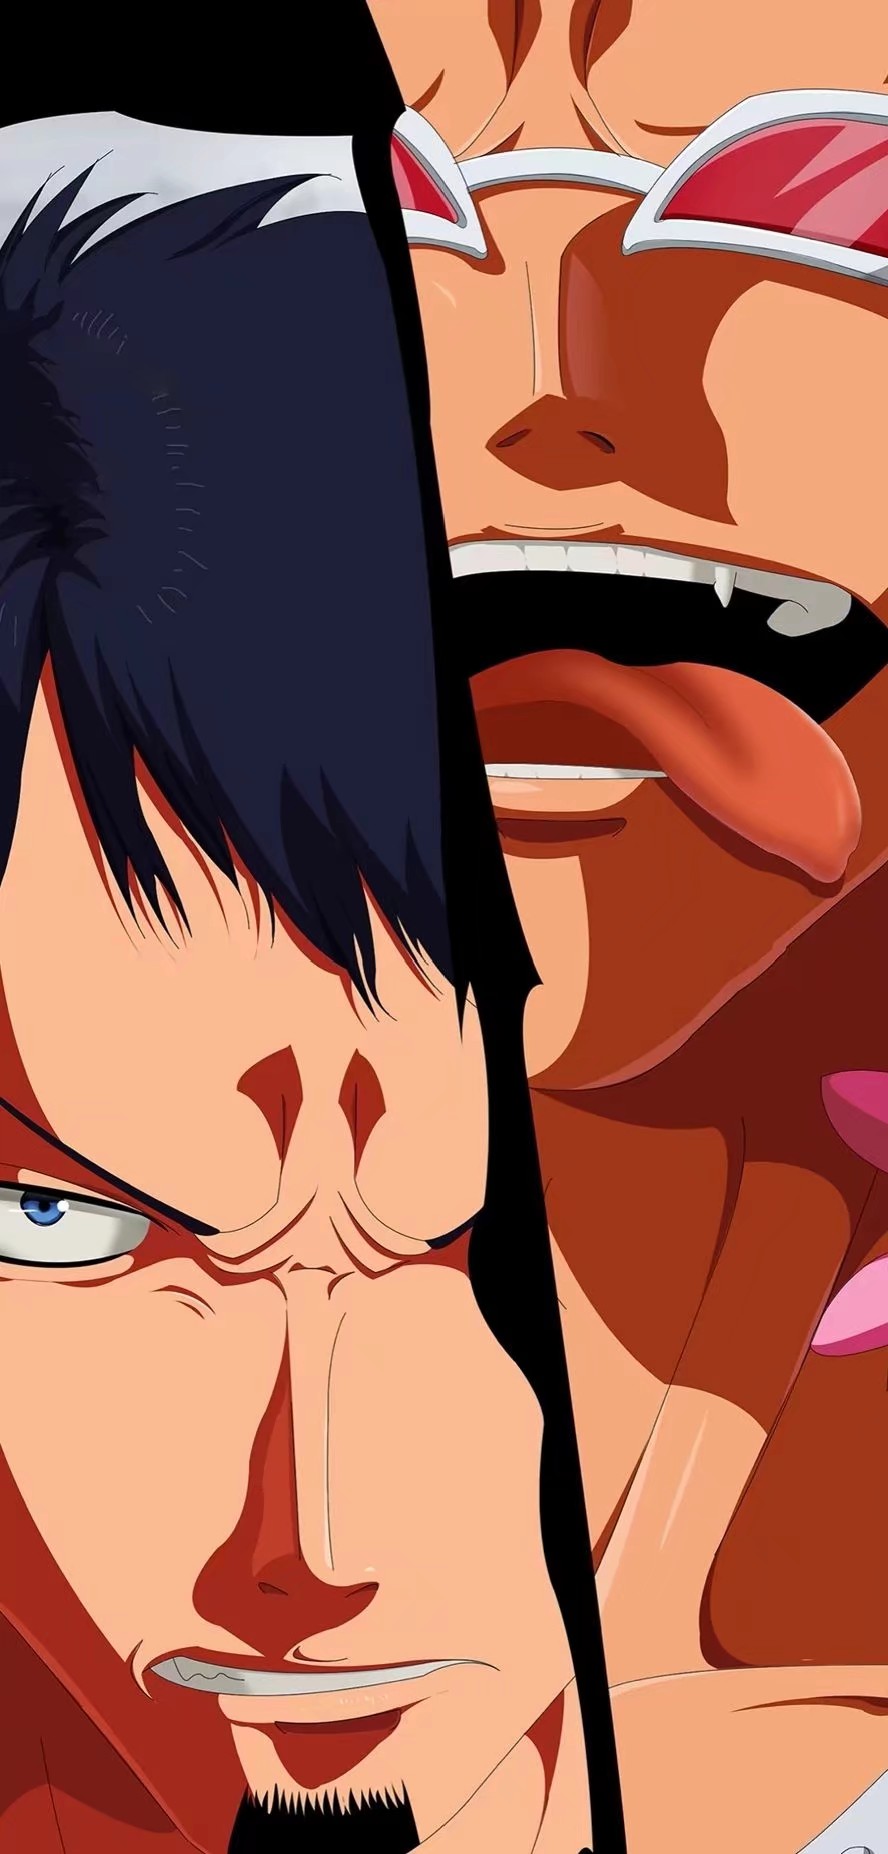 Anime 888x1854 anime face closeup collage tongues tongue out angry